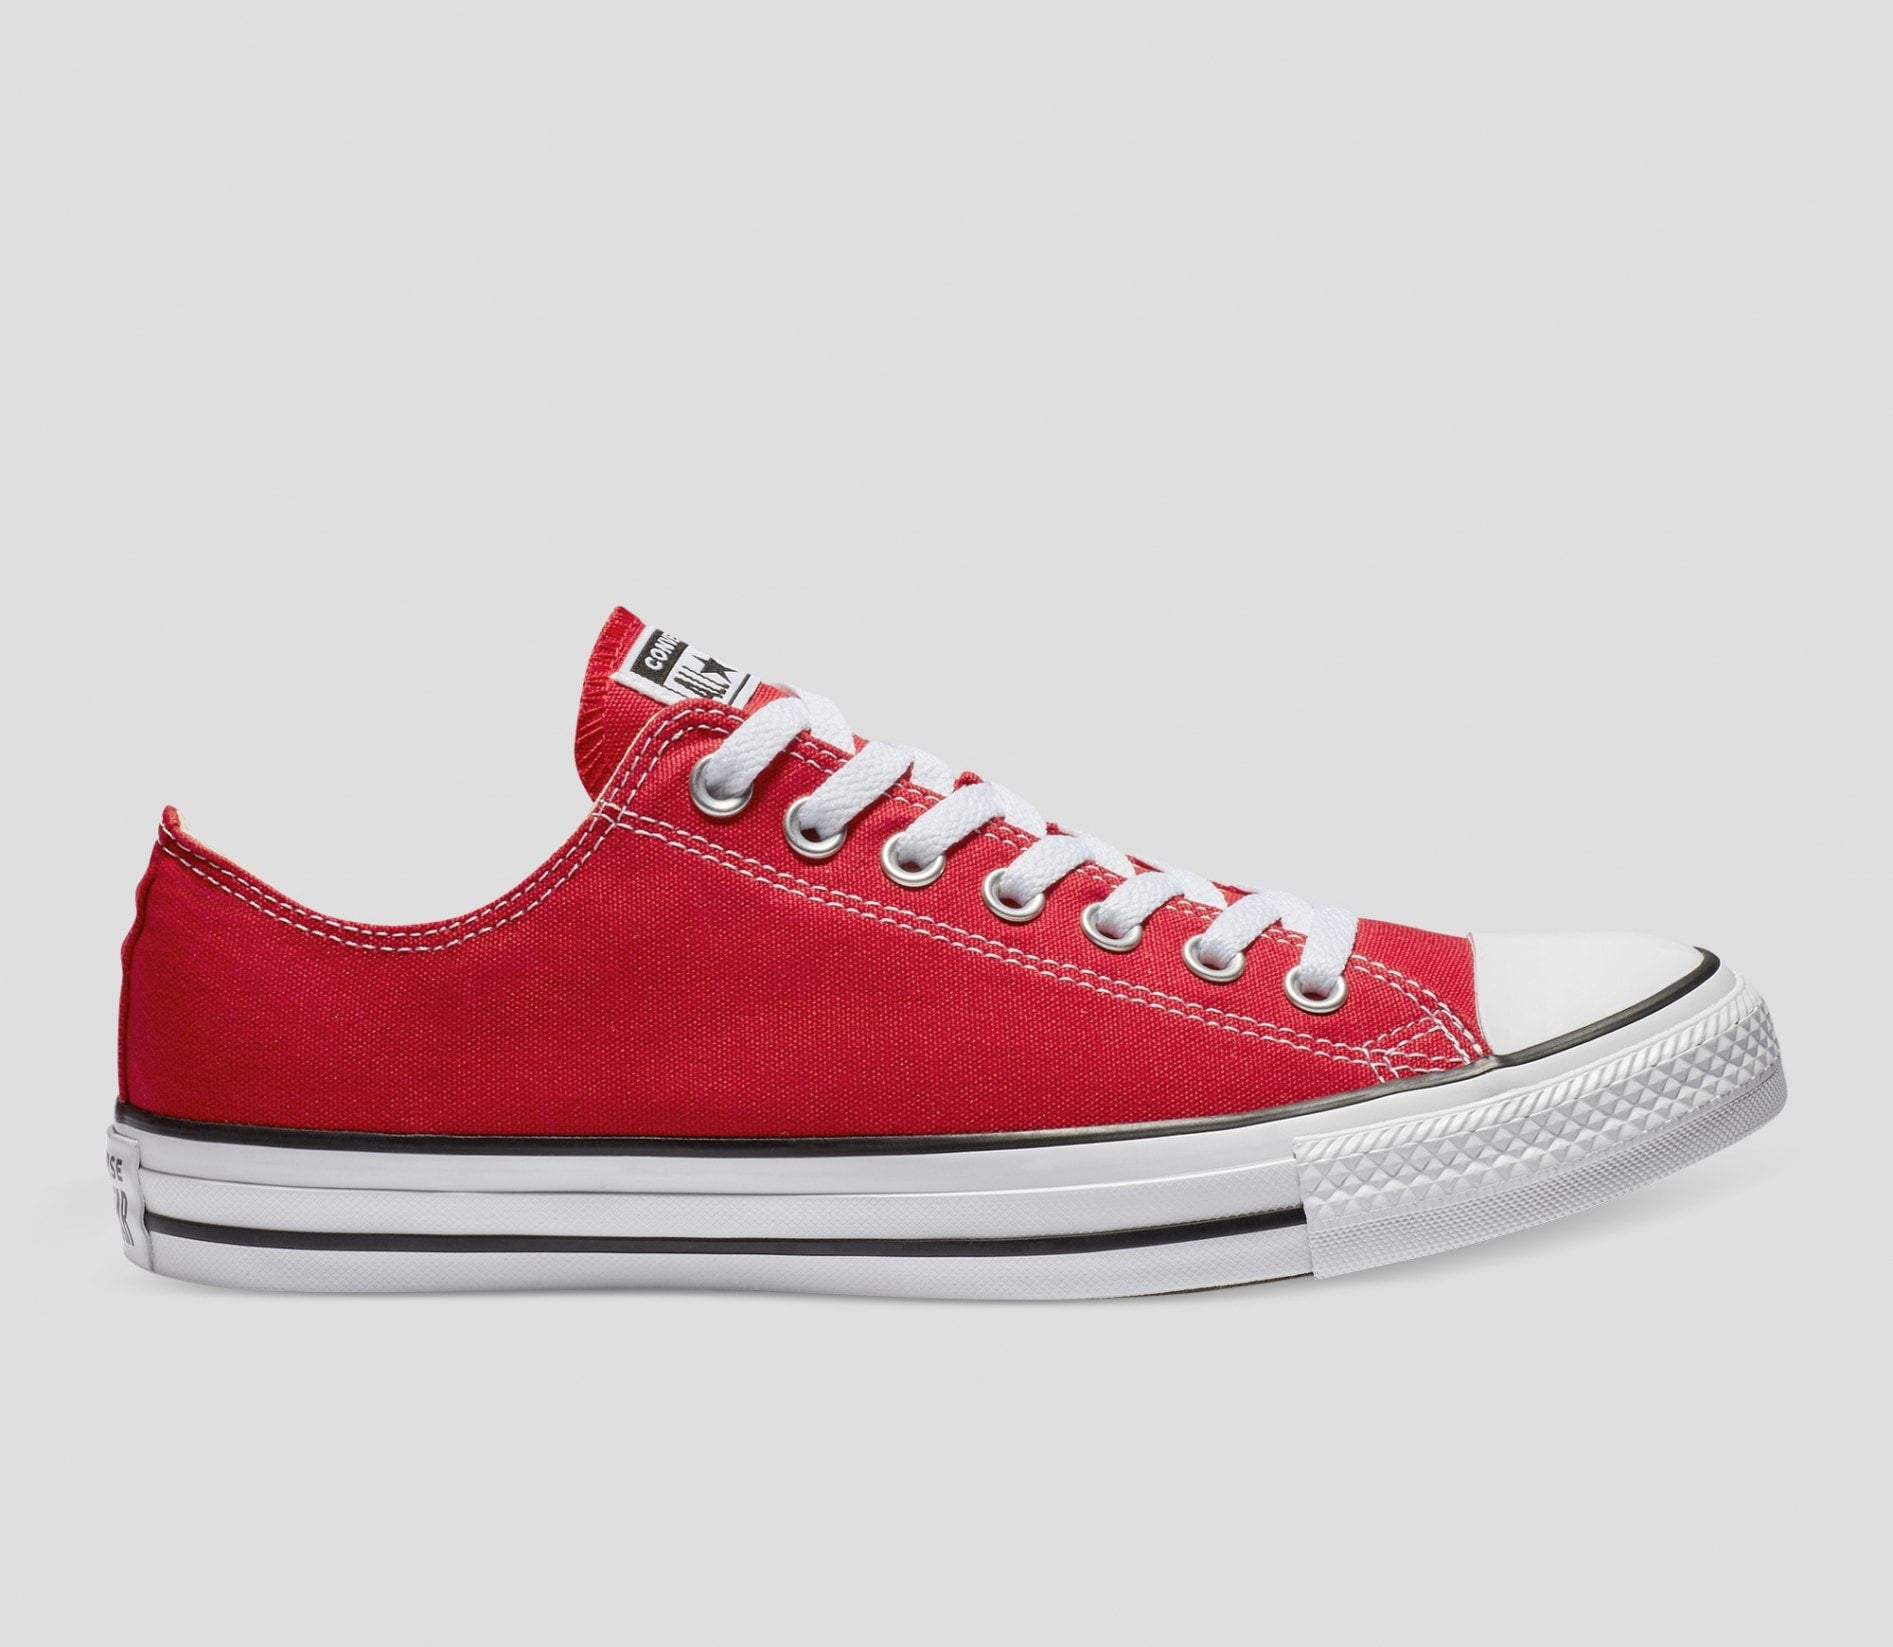 CONVERSE Chuck Taylor All Star Low Shoe - Red - VENUE.